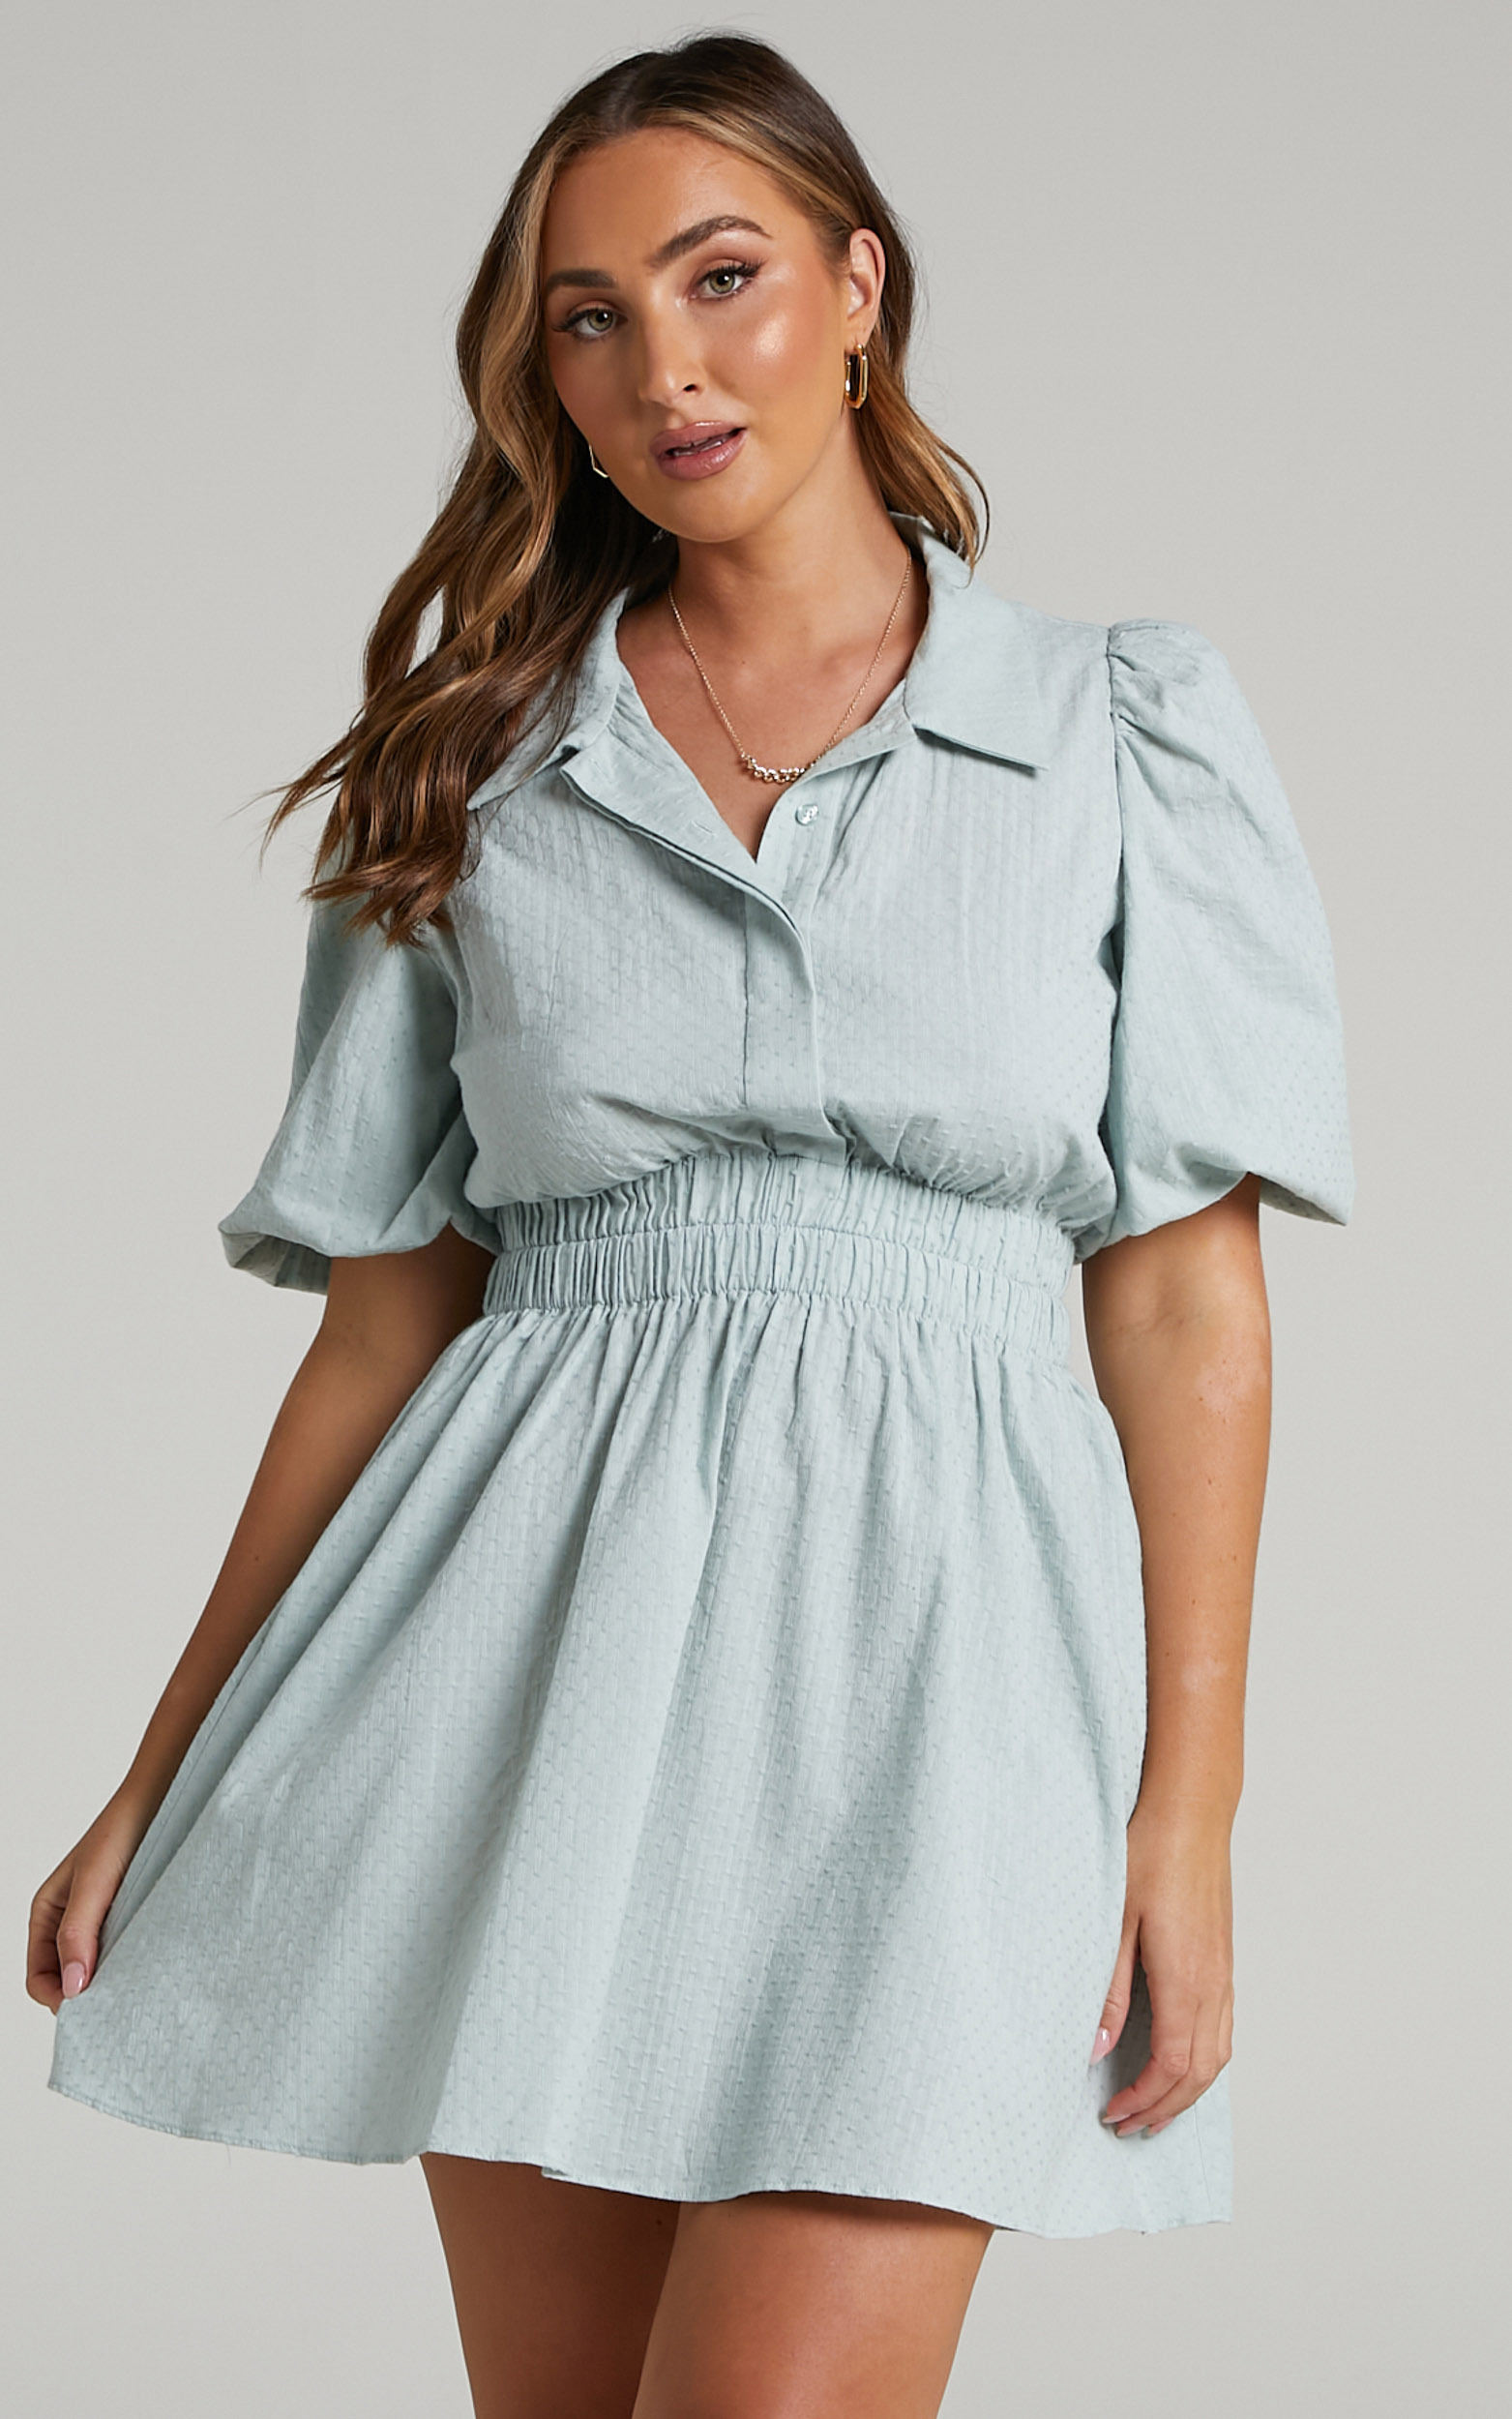 Triana Textured Collared Mini Dress in Sage - 06, GRN1, hi-res image number null